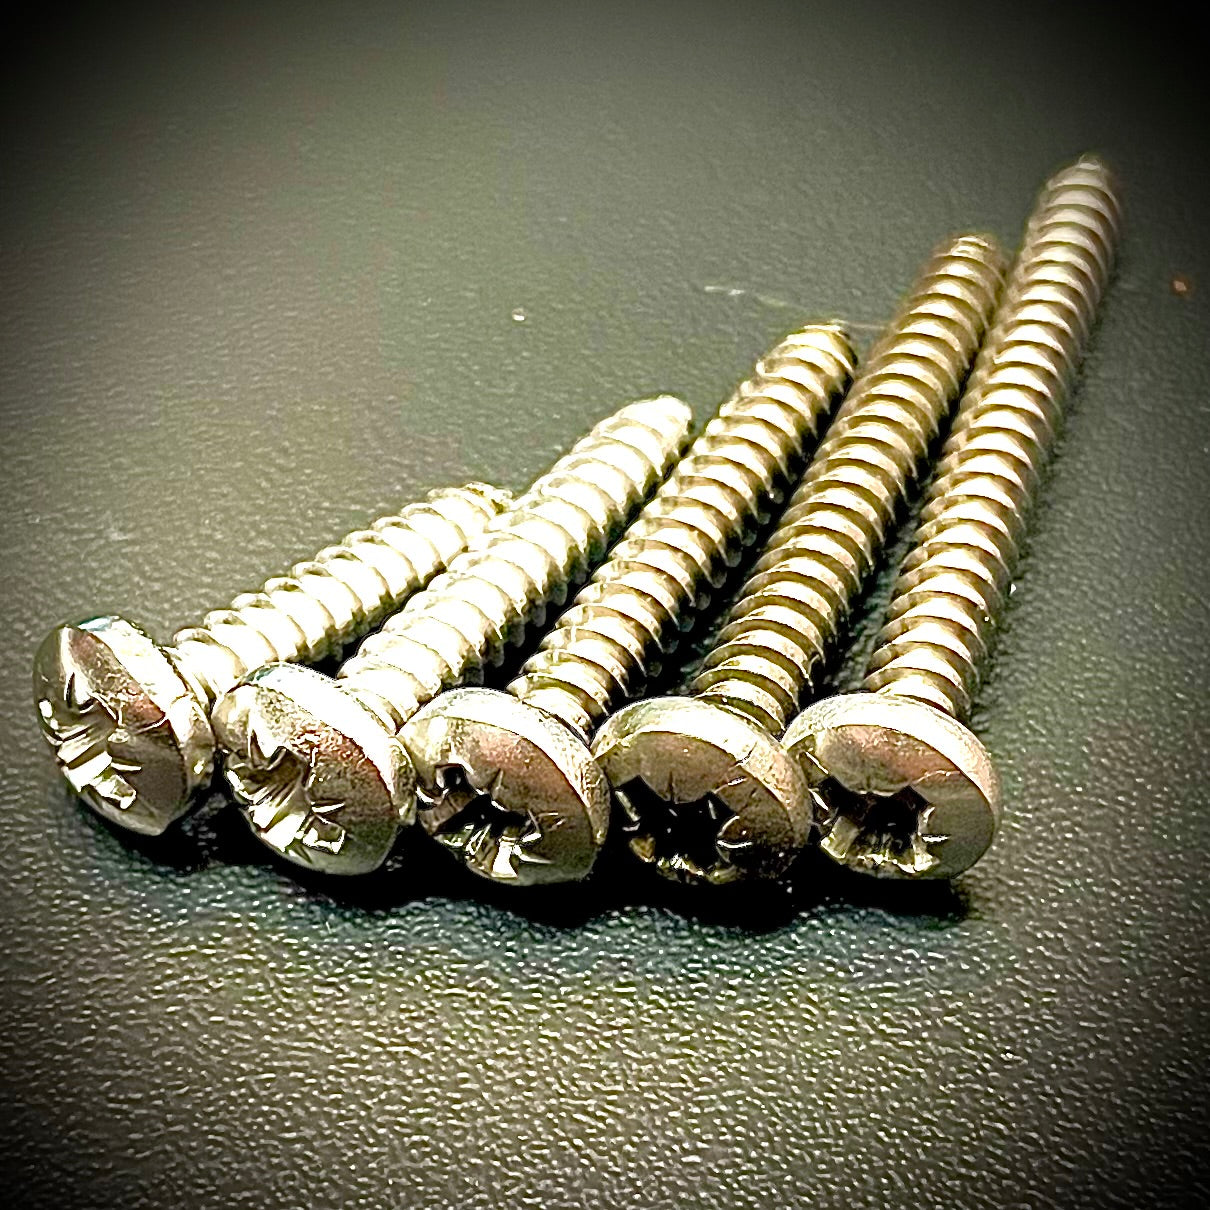 No. 4, 2.9mm Pozi Pan Self Tapping Screws AB Point A2/304 Stainless - Fixaball Ltd. Fixings and Fasteners UK